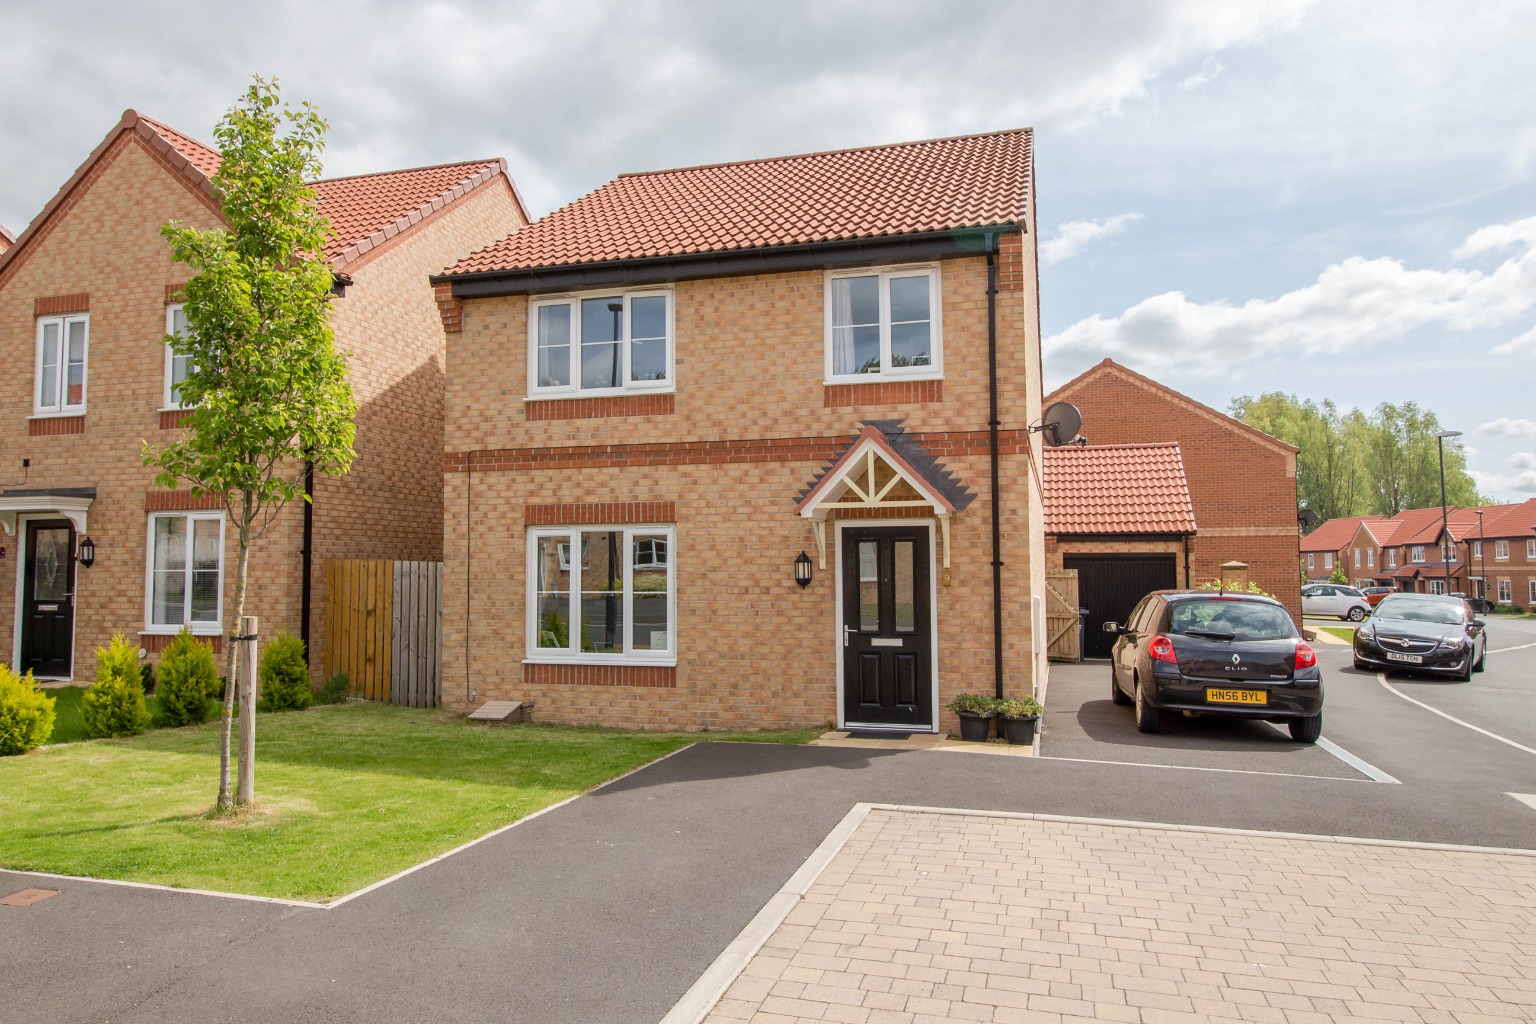 4 bed detached house for sale in Beechwood Grove, Catterick Garrison - Property Image 1